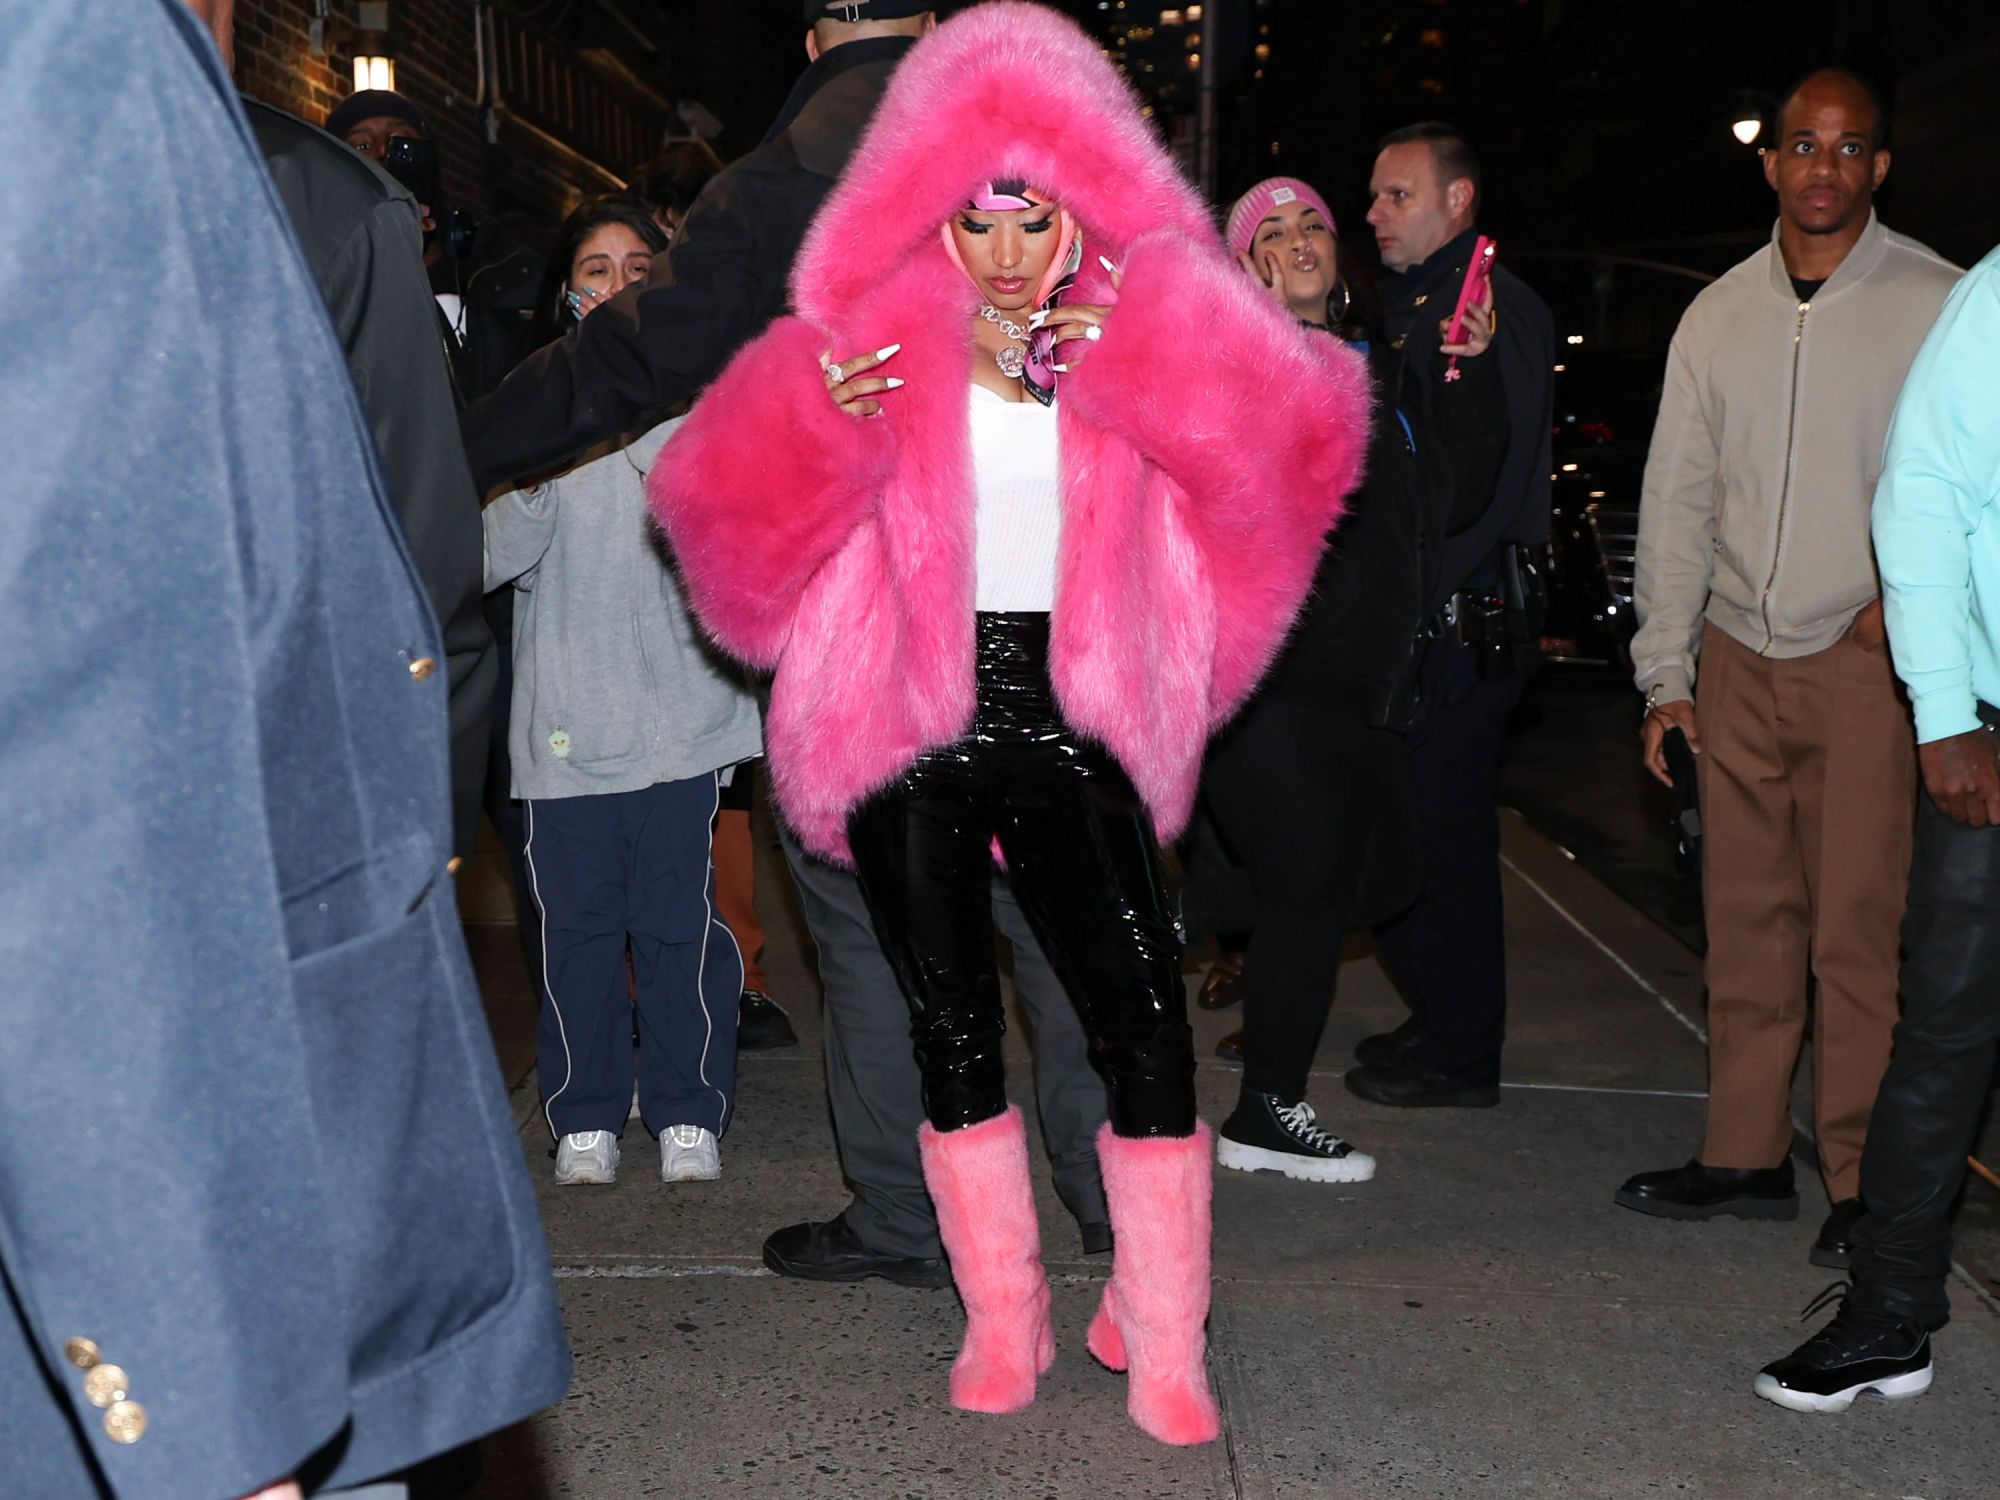 NEW YORK, NY - DECEMBER 11: Nicki Minaj is seen arriving at 'The Late Show With Stephen Colbert' on December 11, 2023 in New York City.  (Photo by Jason Howard/Bauer-Griffin/GC Images)